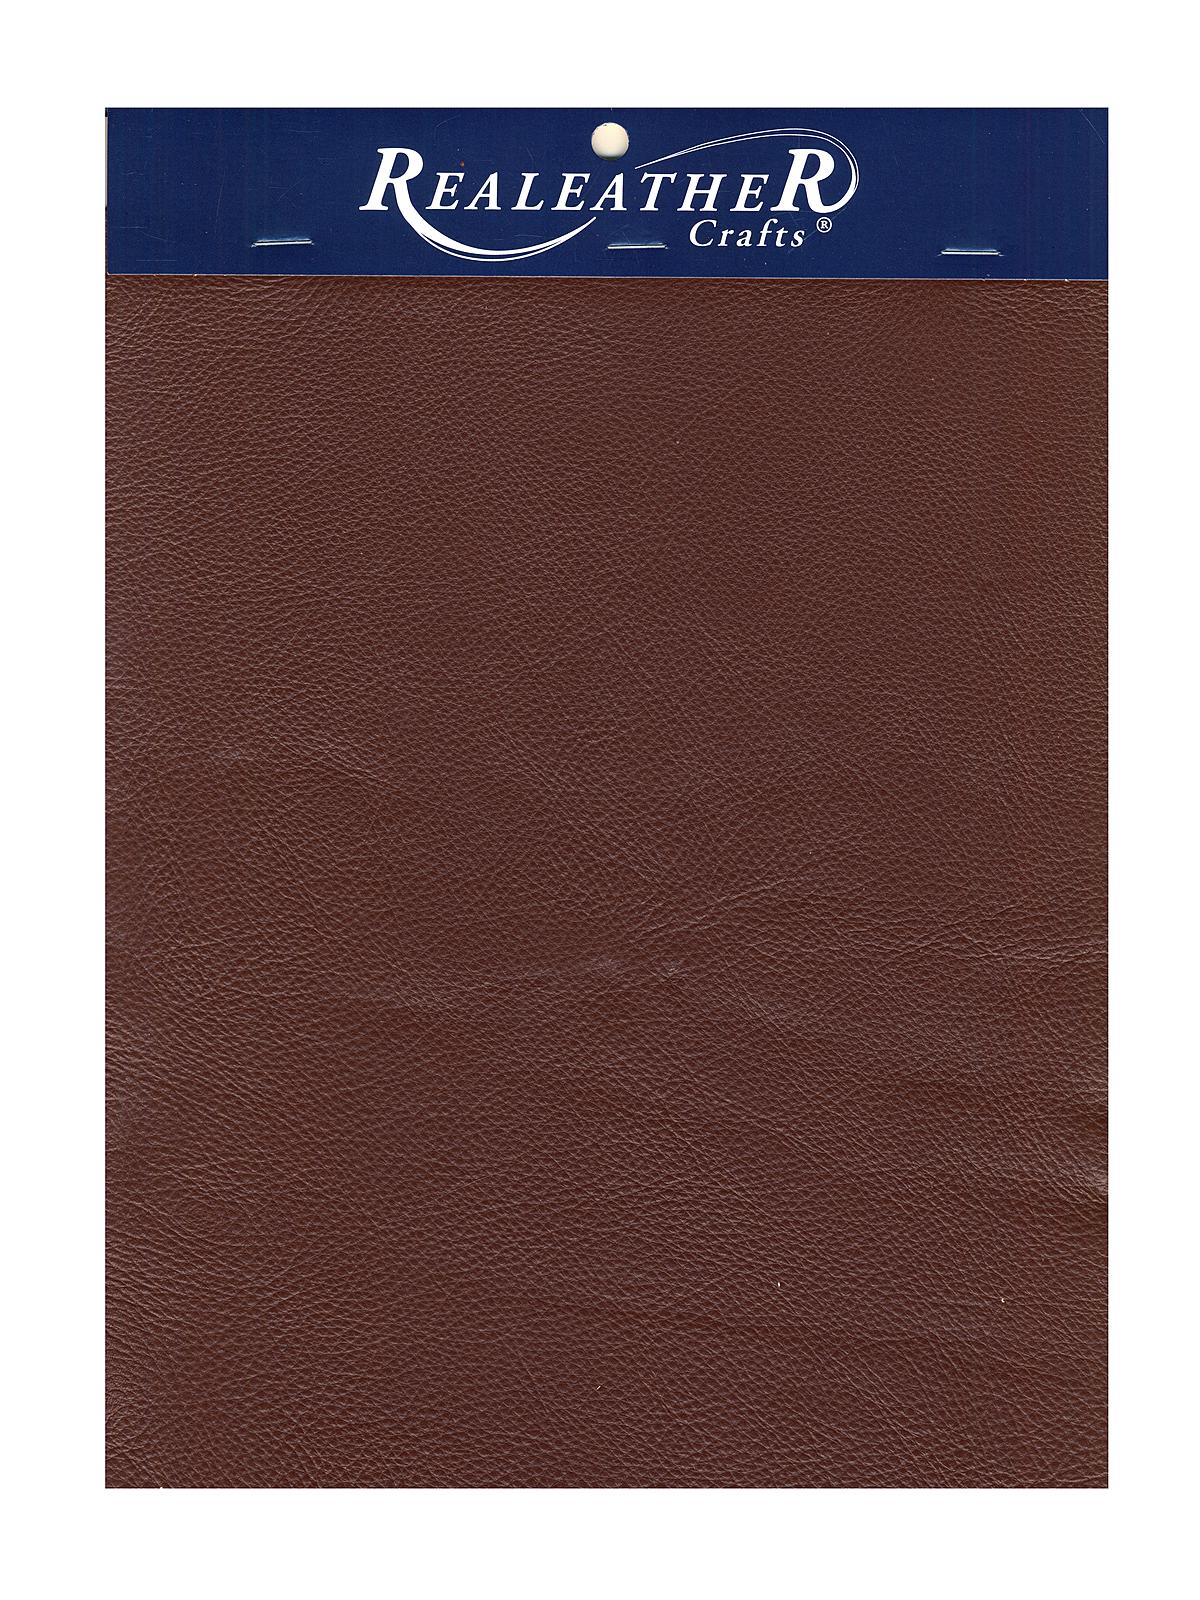 Trim Pieces Premium Leather 8 1 2 In. X 11 In. Brown